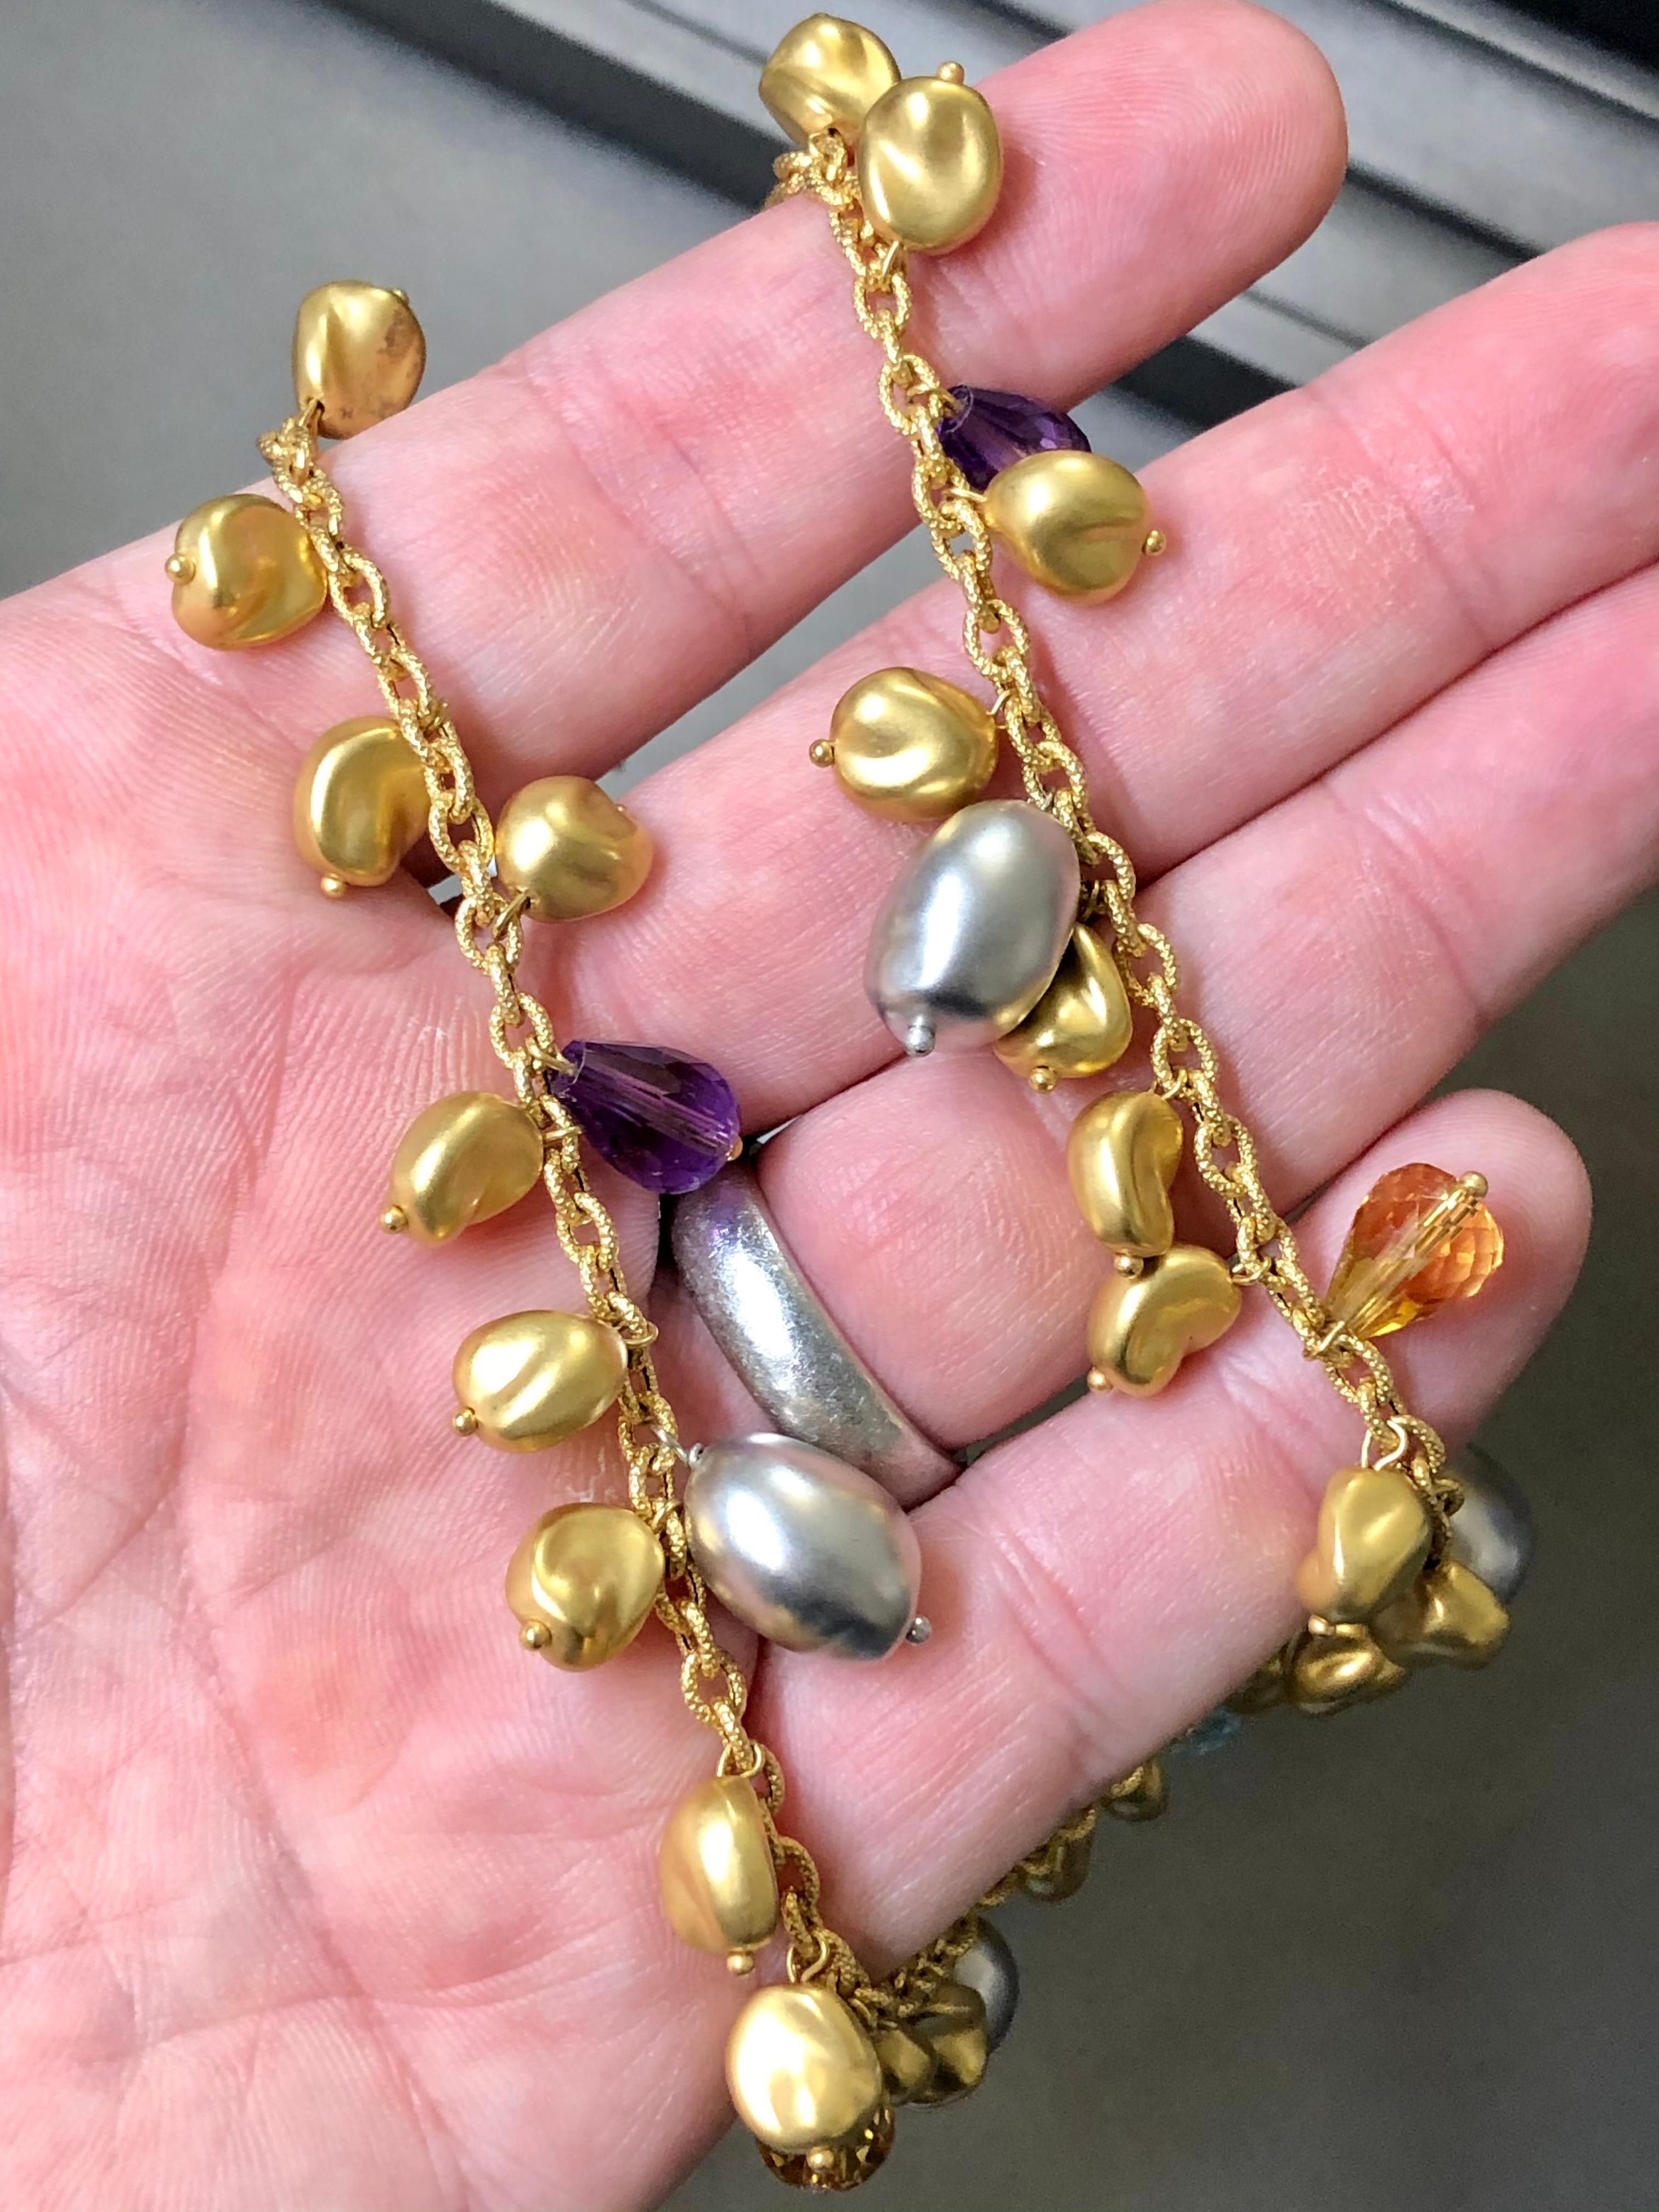 ROBERTO COIN 18K Briolette Amethyst Topaz Nugget Necklace 16” In Good Condition For Sale In Winter Springs, FL